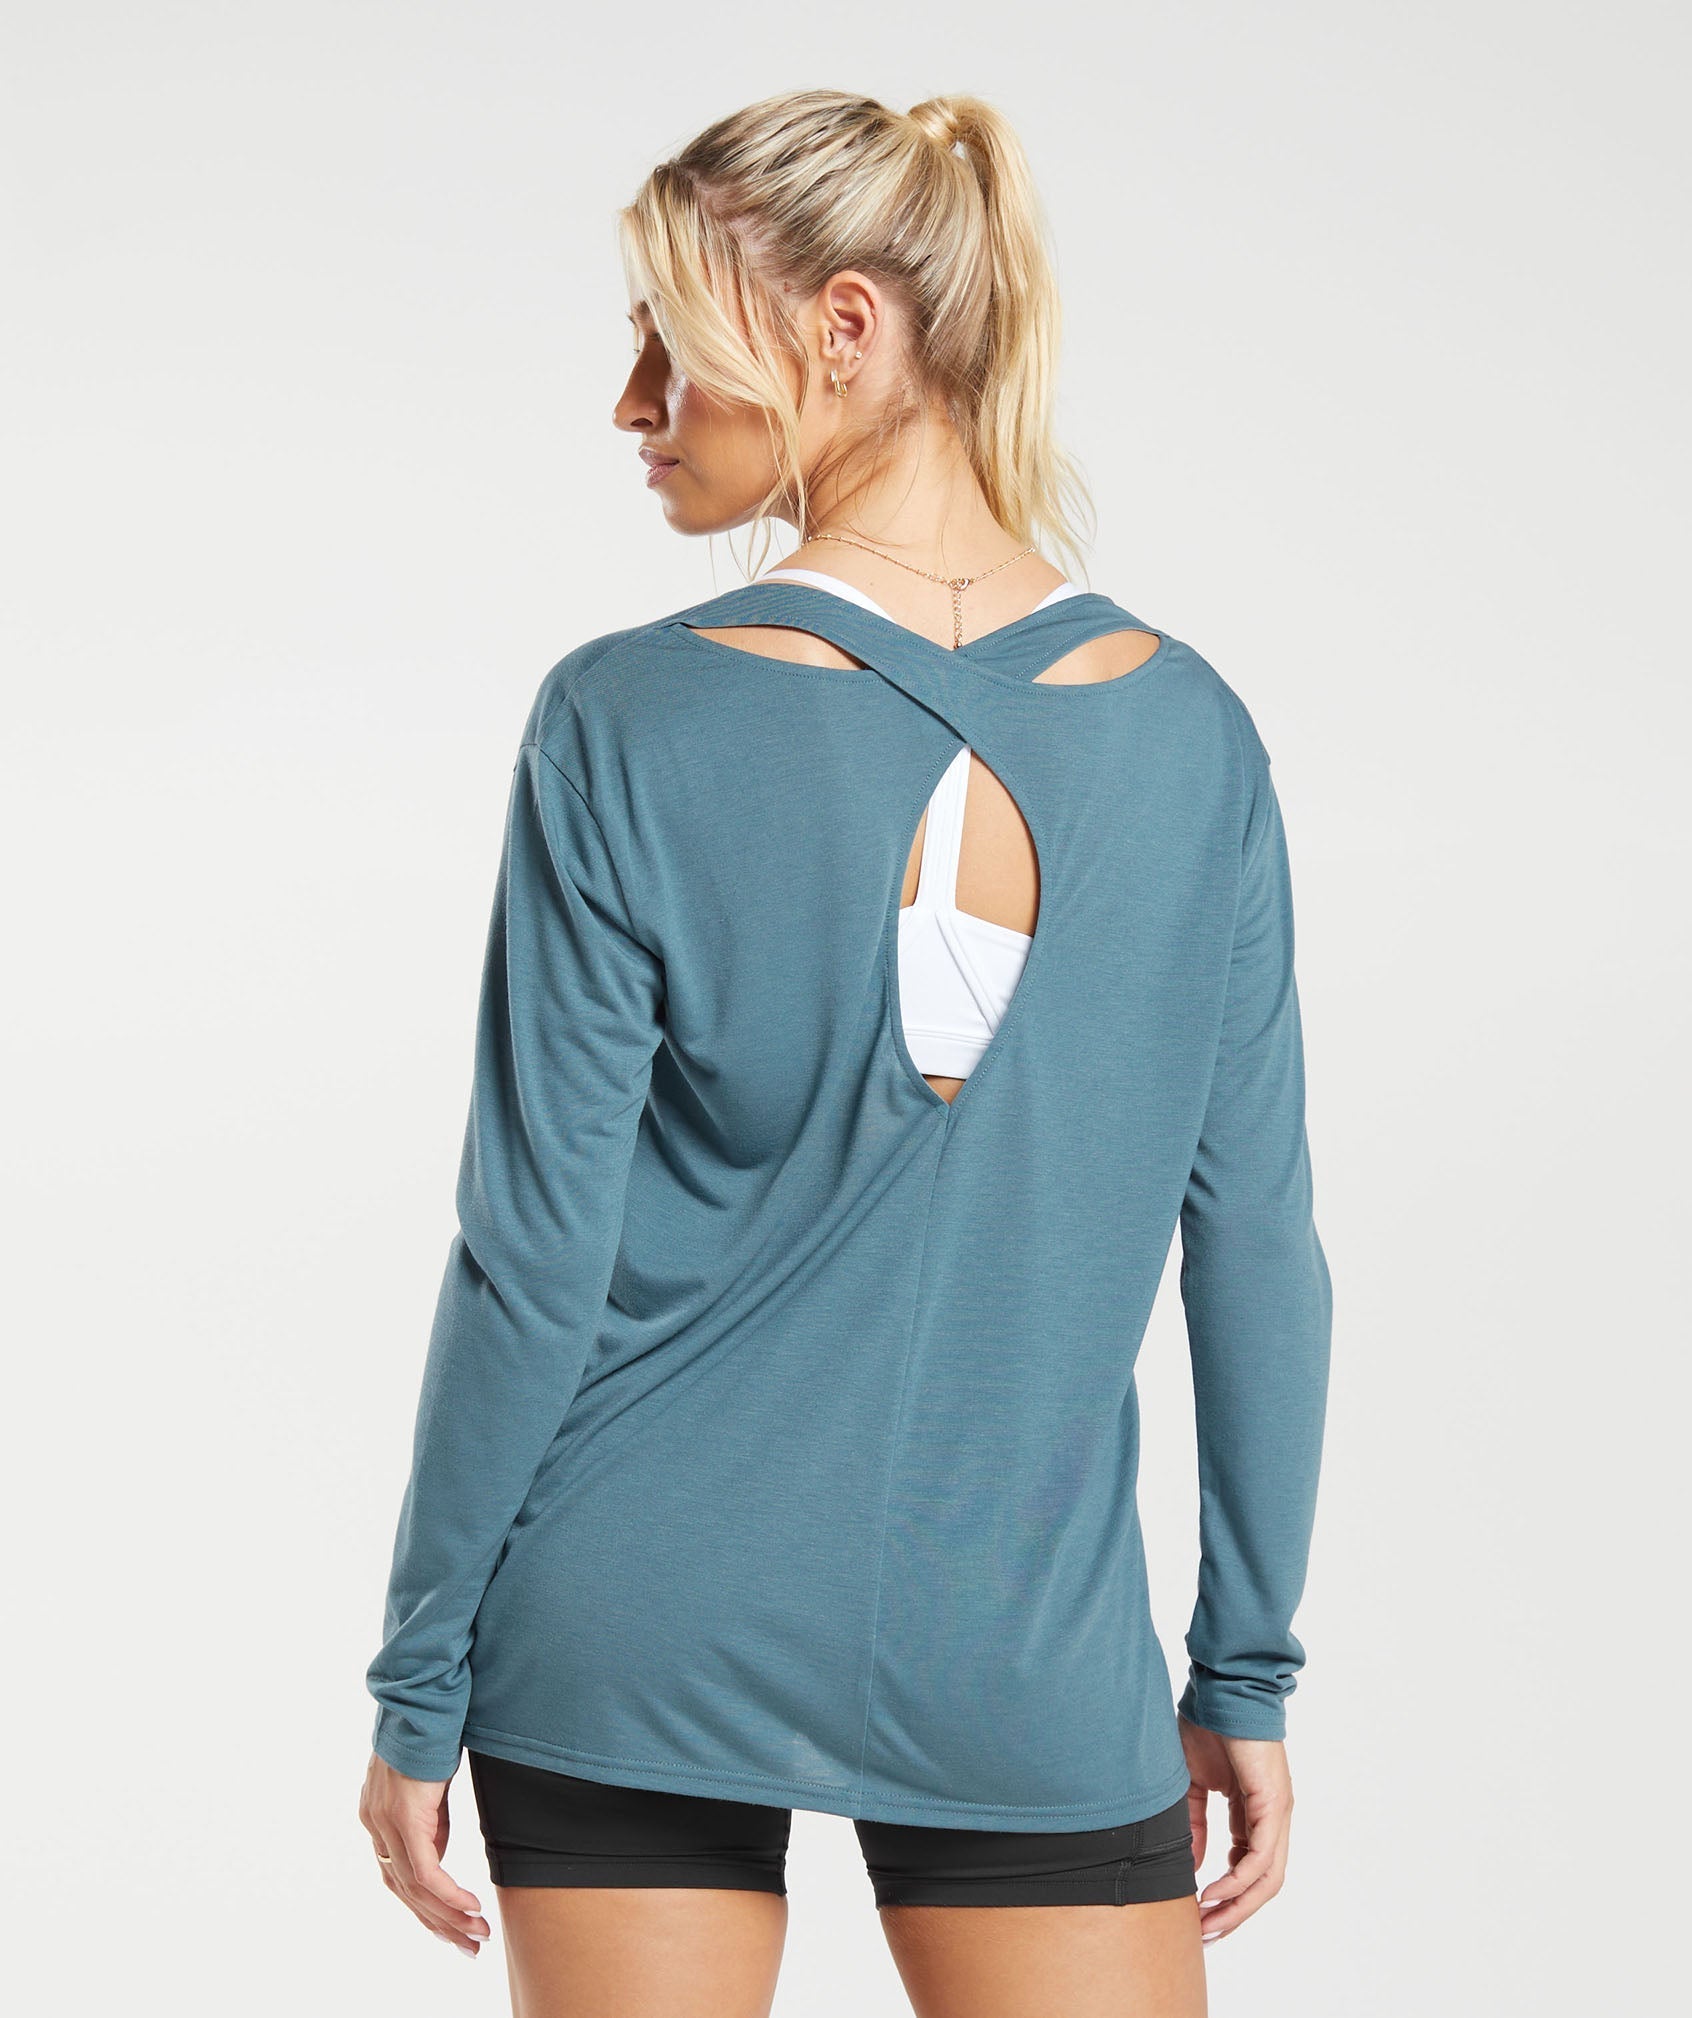 Super Soft Cut-Out Long Sleeve Top in Denim Teal - view 2